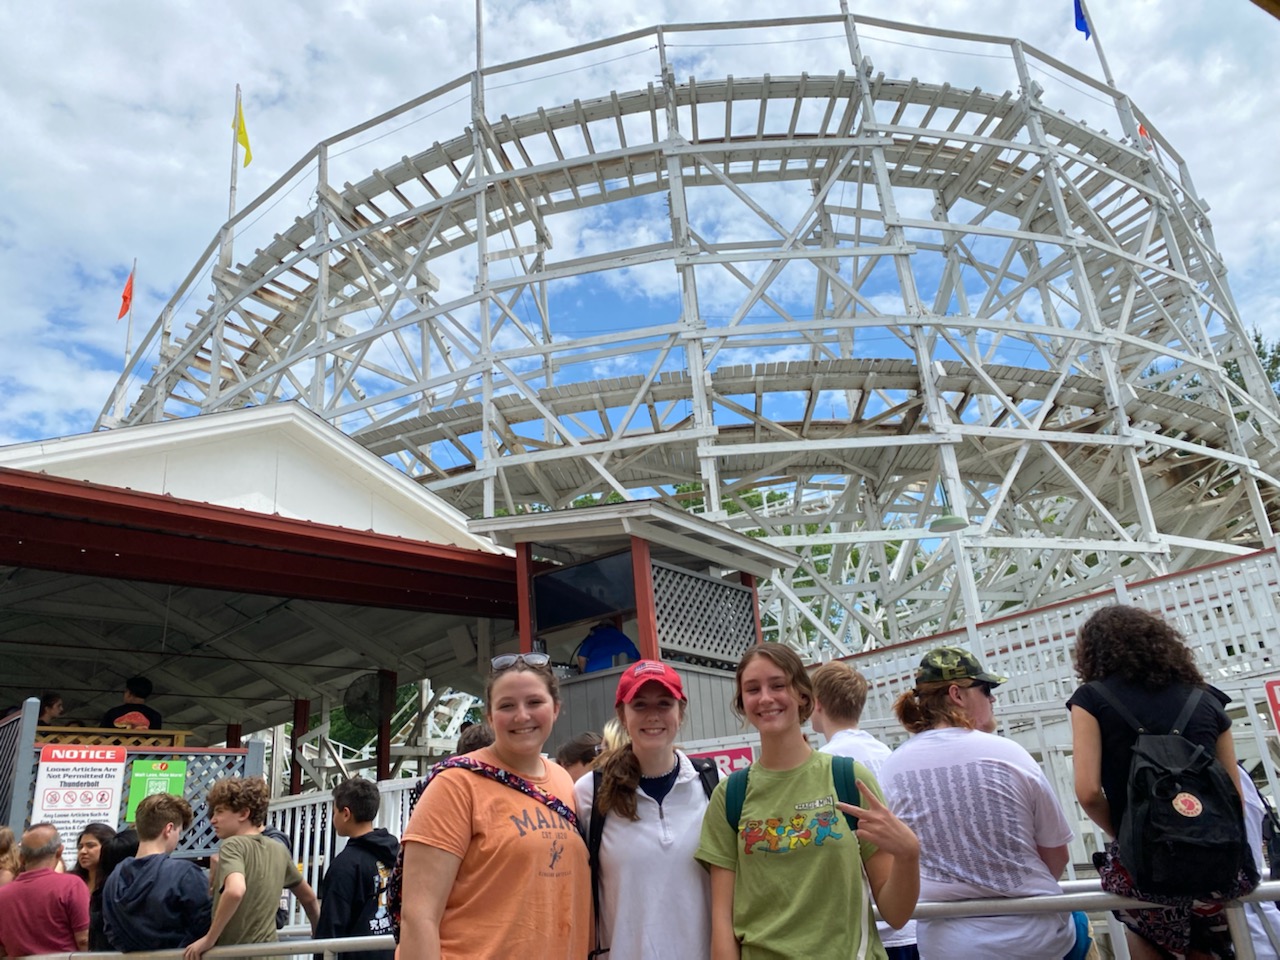 students in front of a rollercoaster